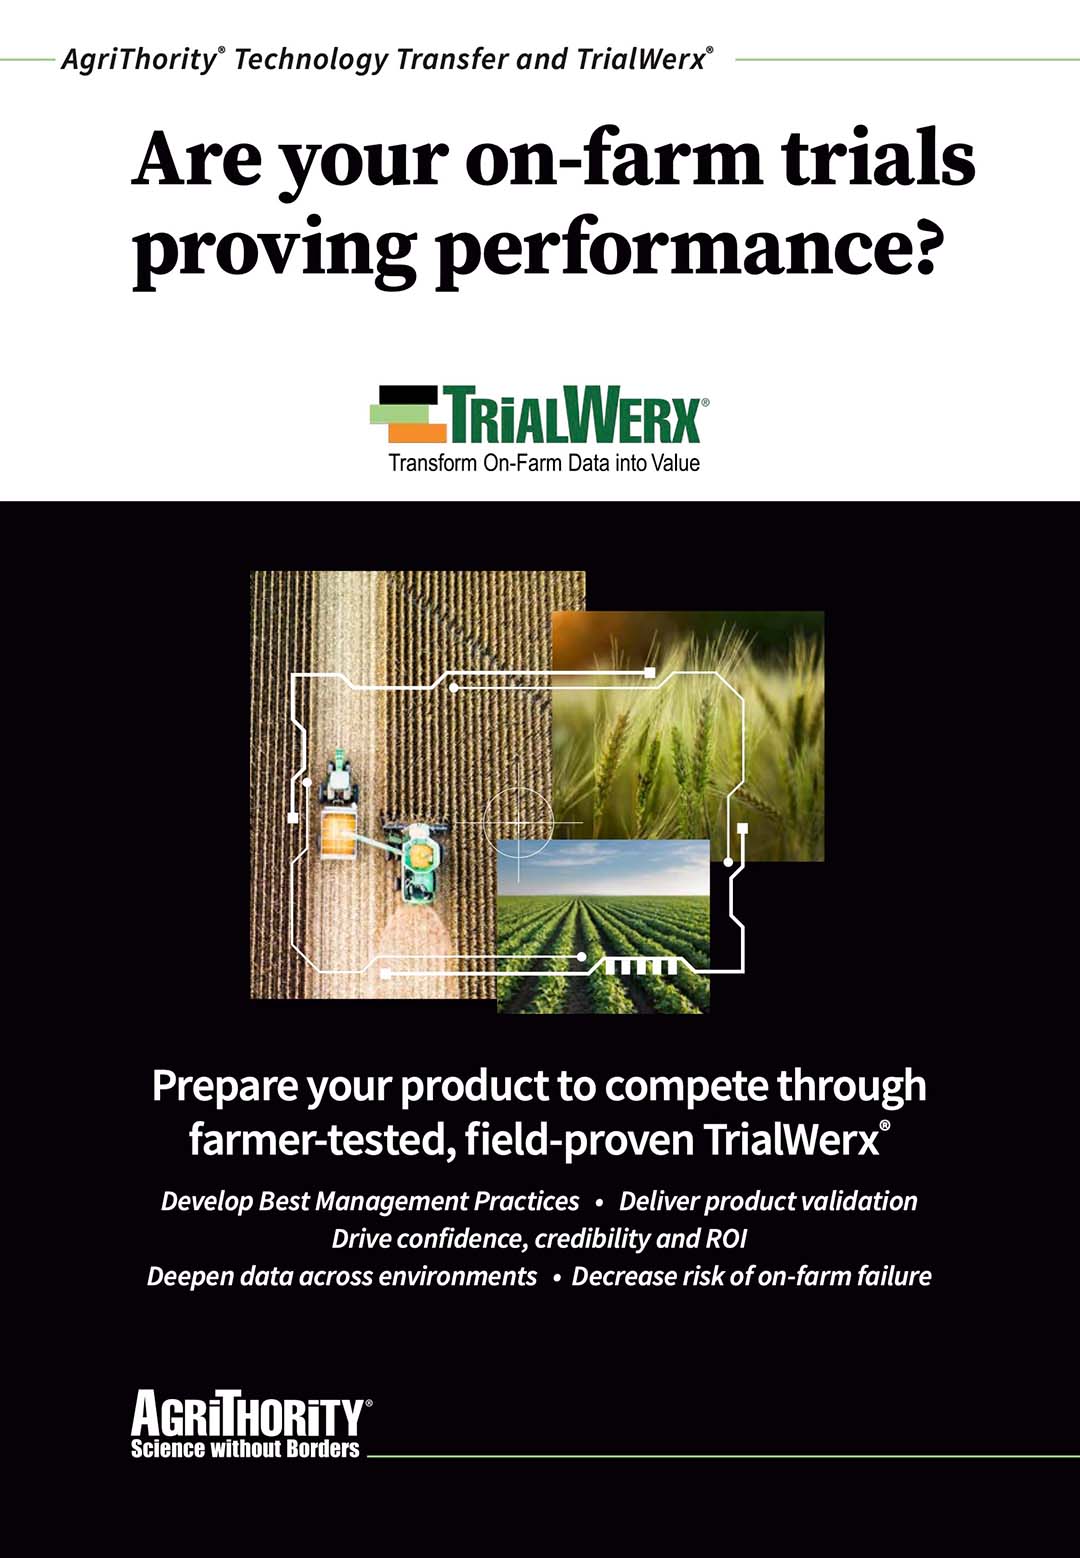 AgriThority® Technology Transfer & TrialWerx®: Are your on-farm trials proving performance? PDF download thumbnail